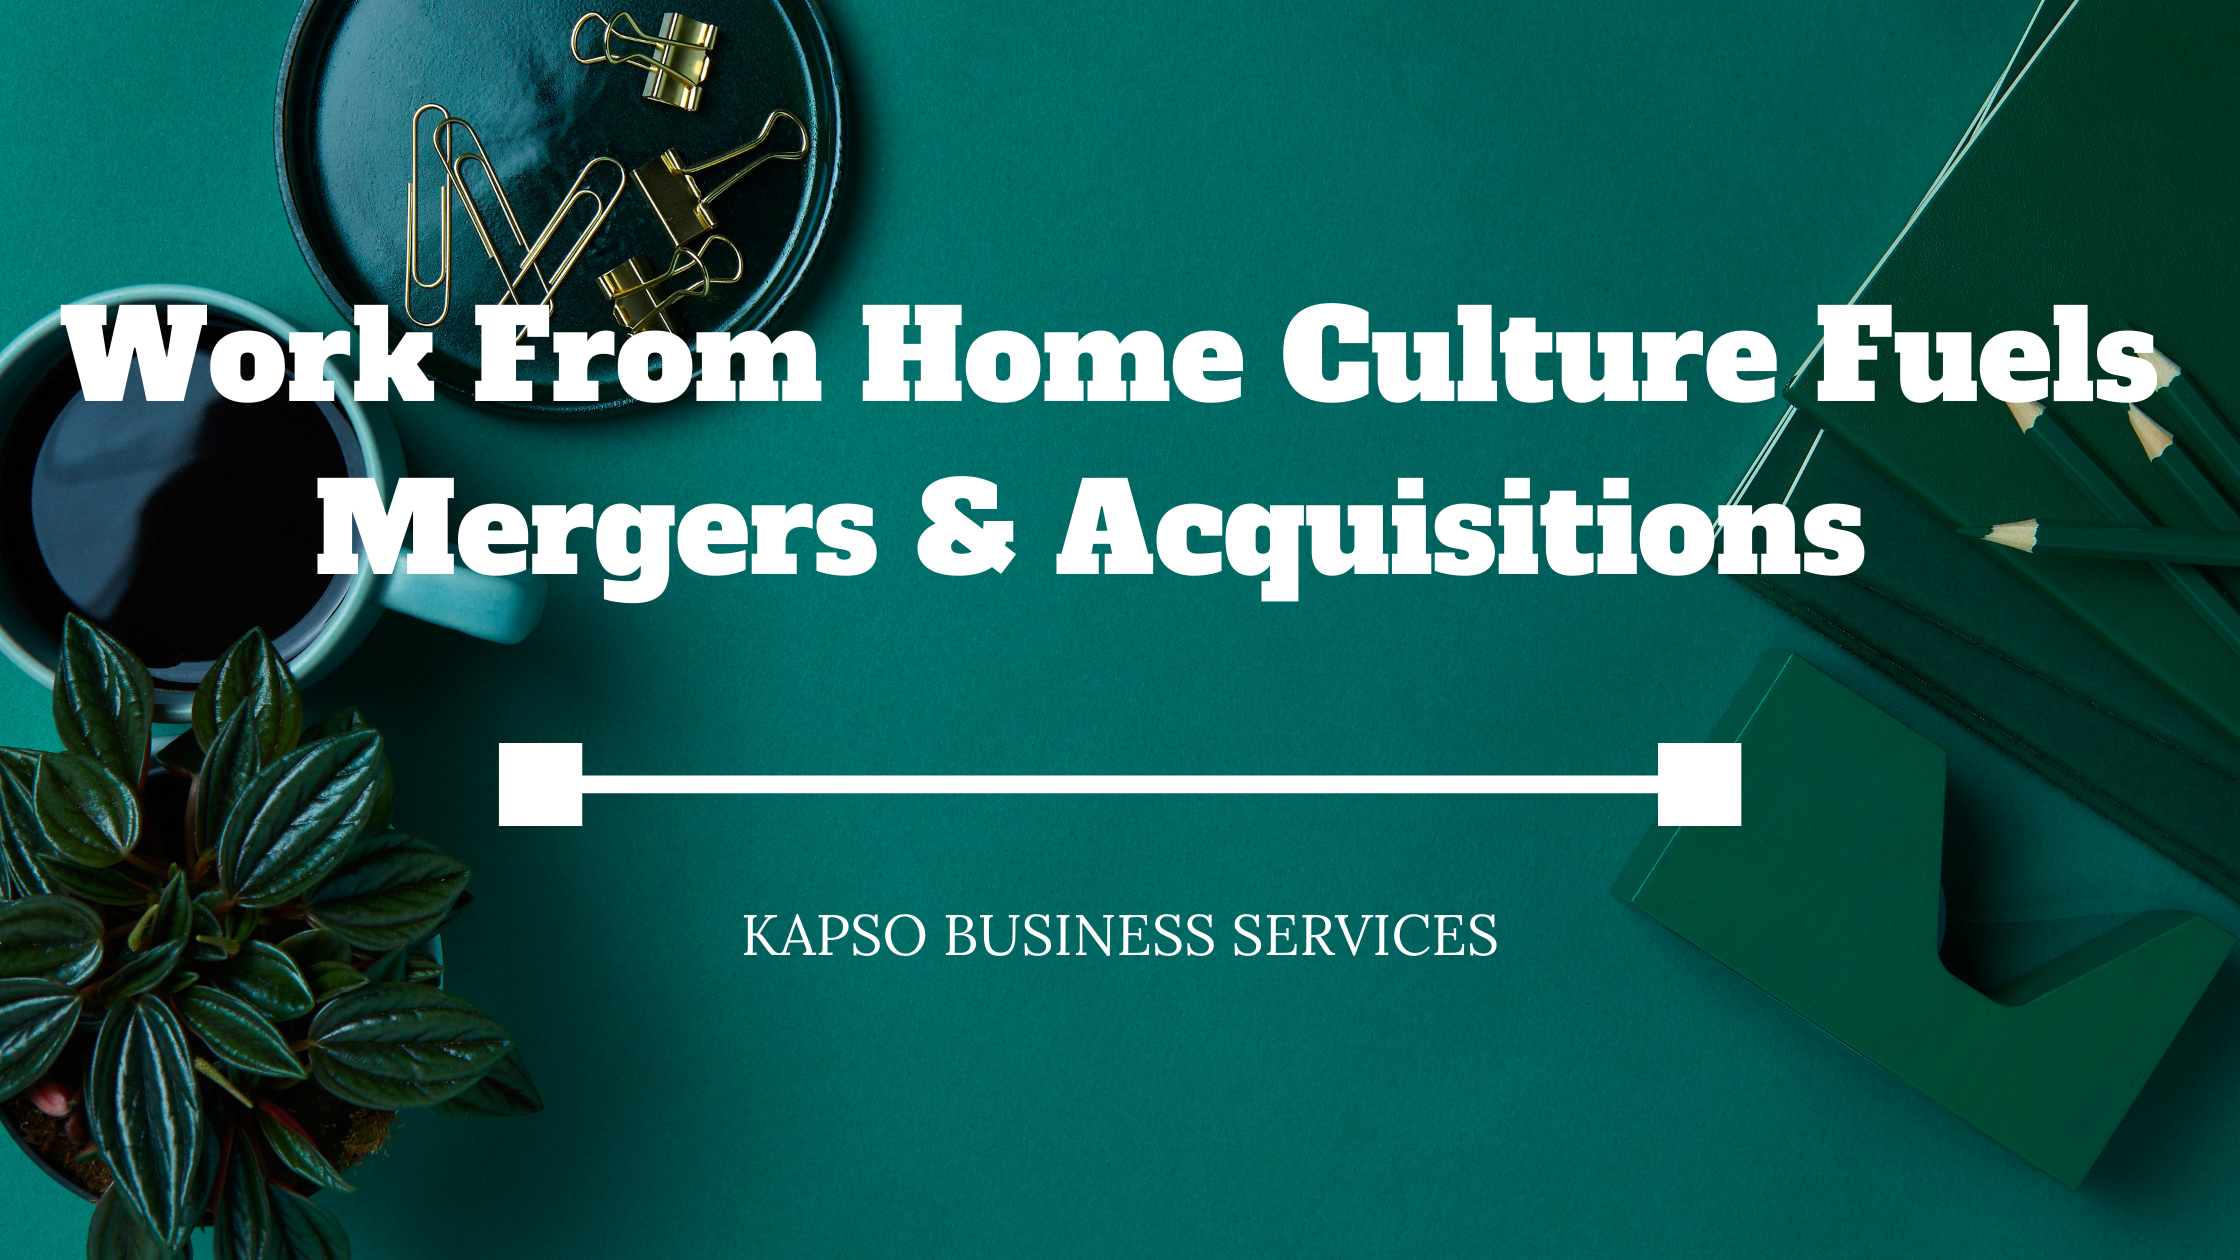 Work From Home Culture Fuels Mergers & Acquisitions